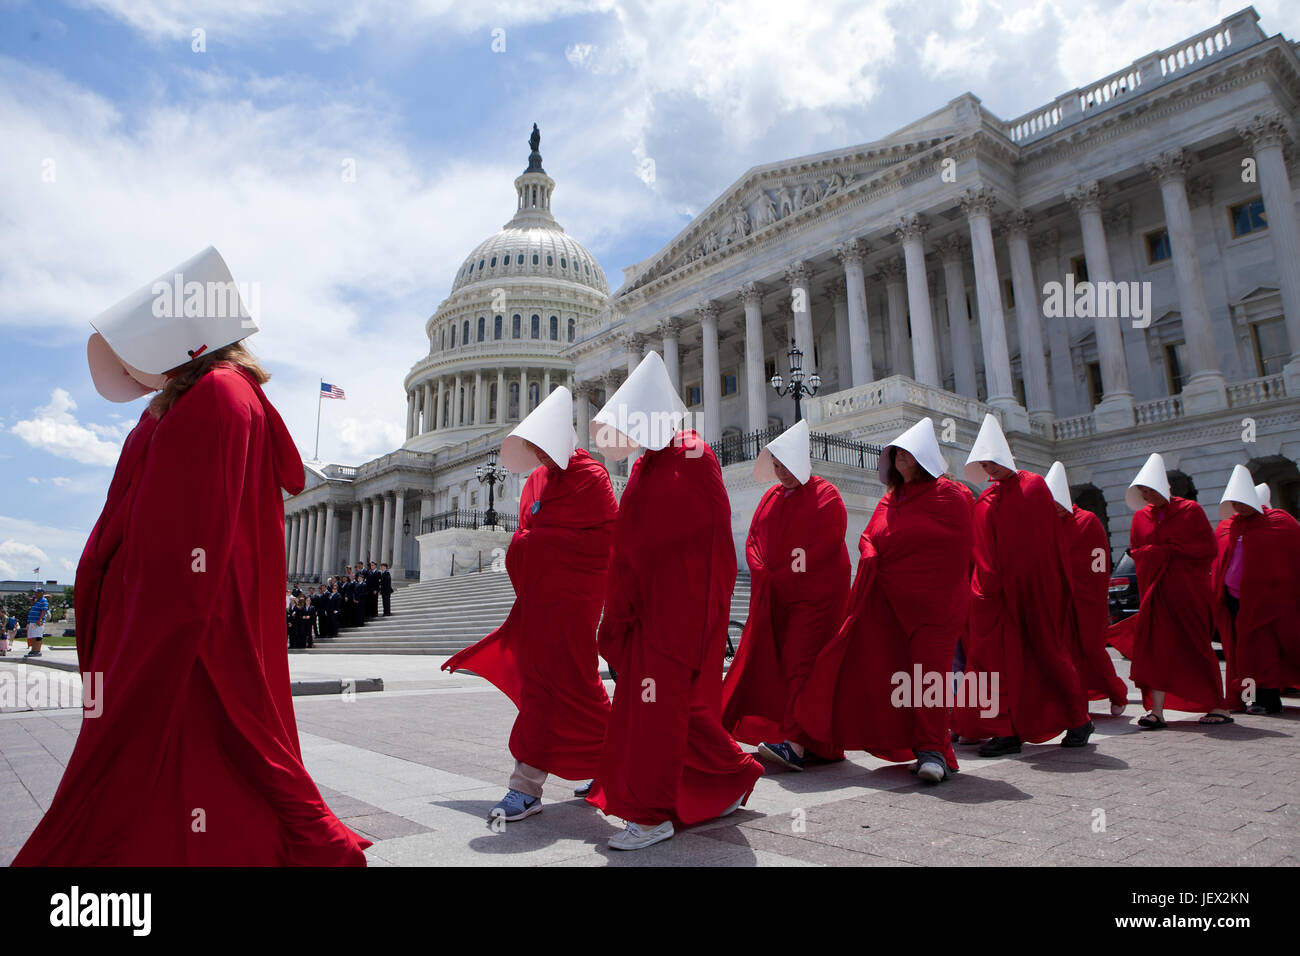 Washington, DC, USA. 27th June, 2017. Ahead of the US Senate AHCA vote (American Health Care Act), hundreds gather on capitol hill to protest Republican provisions related to women's healthcare, including many senators working to delay the vote on Trumpcare. Women dressed in red, inspired by Handmaid's Tale, protest at the US Capitol building. Credit: B Christopher/Alamy Live News Stock Photo